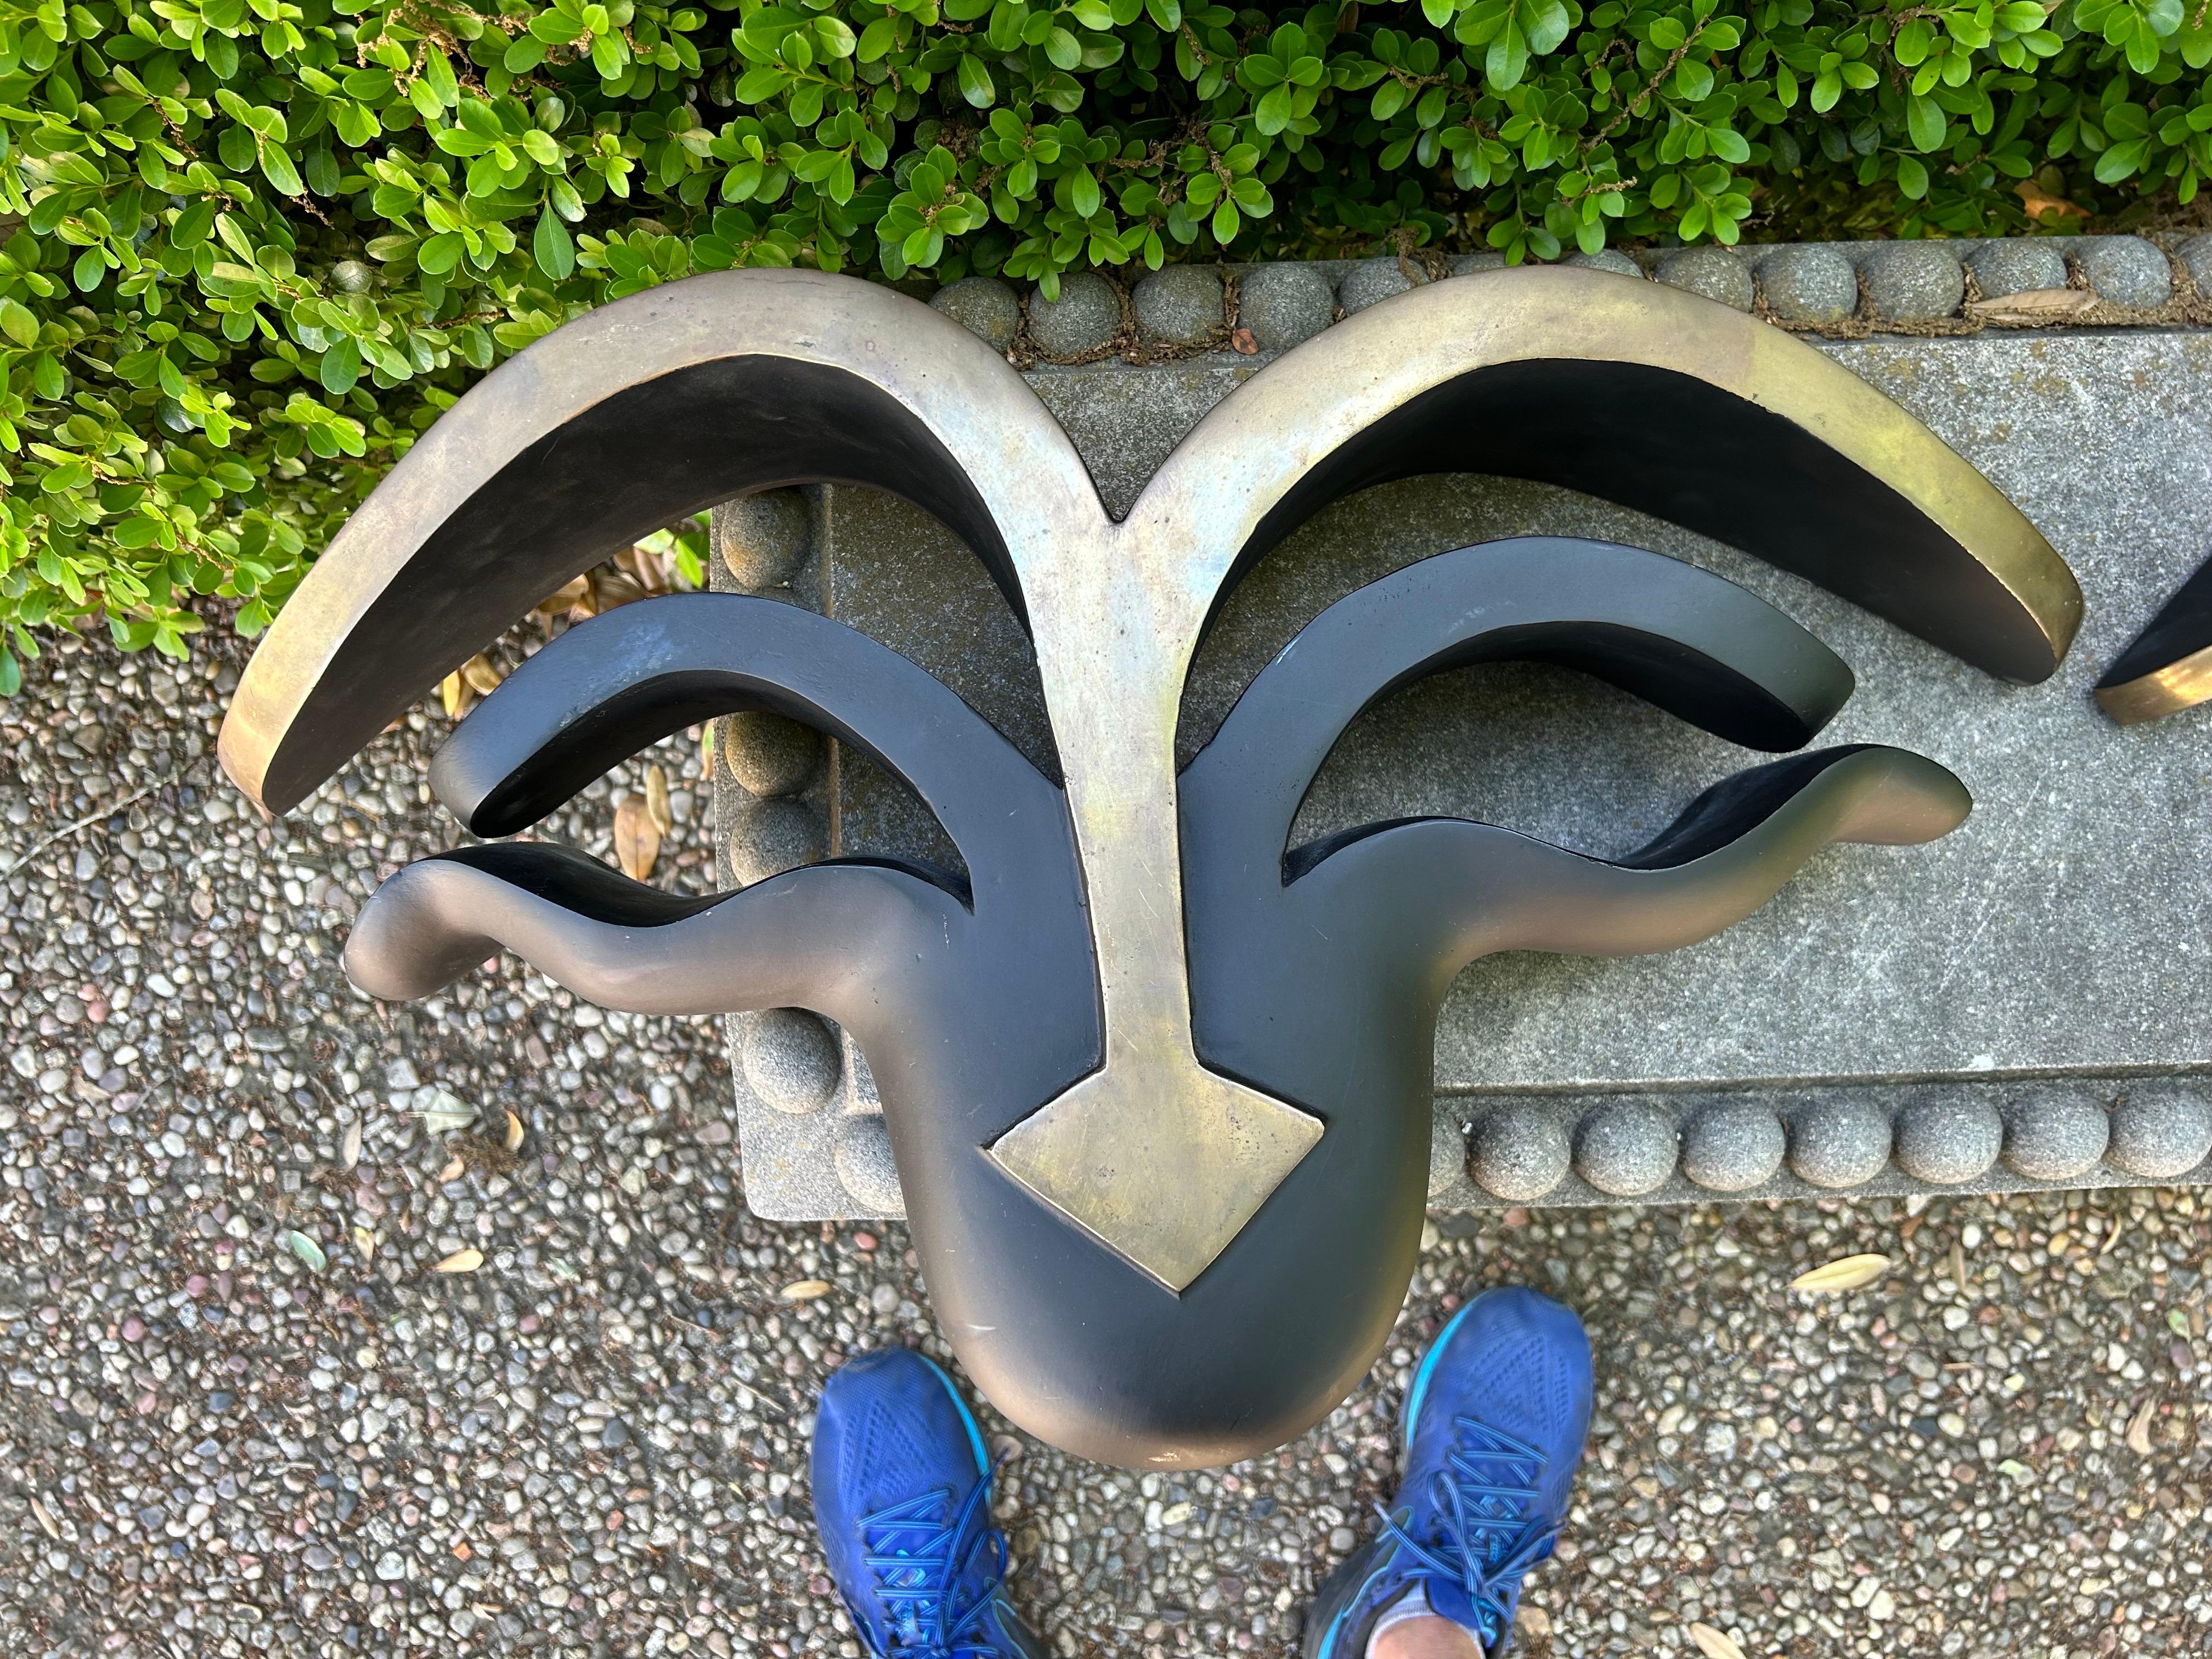 Pair Of Mid Century Modern Bronze Wall Brackets.
This unusual pair of sold bronze wall brackets make great wall accessories.
Can be used as wall sculptures in place of sconces where access to electricity is unavailable.
Most unusual!
